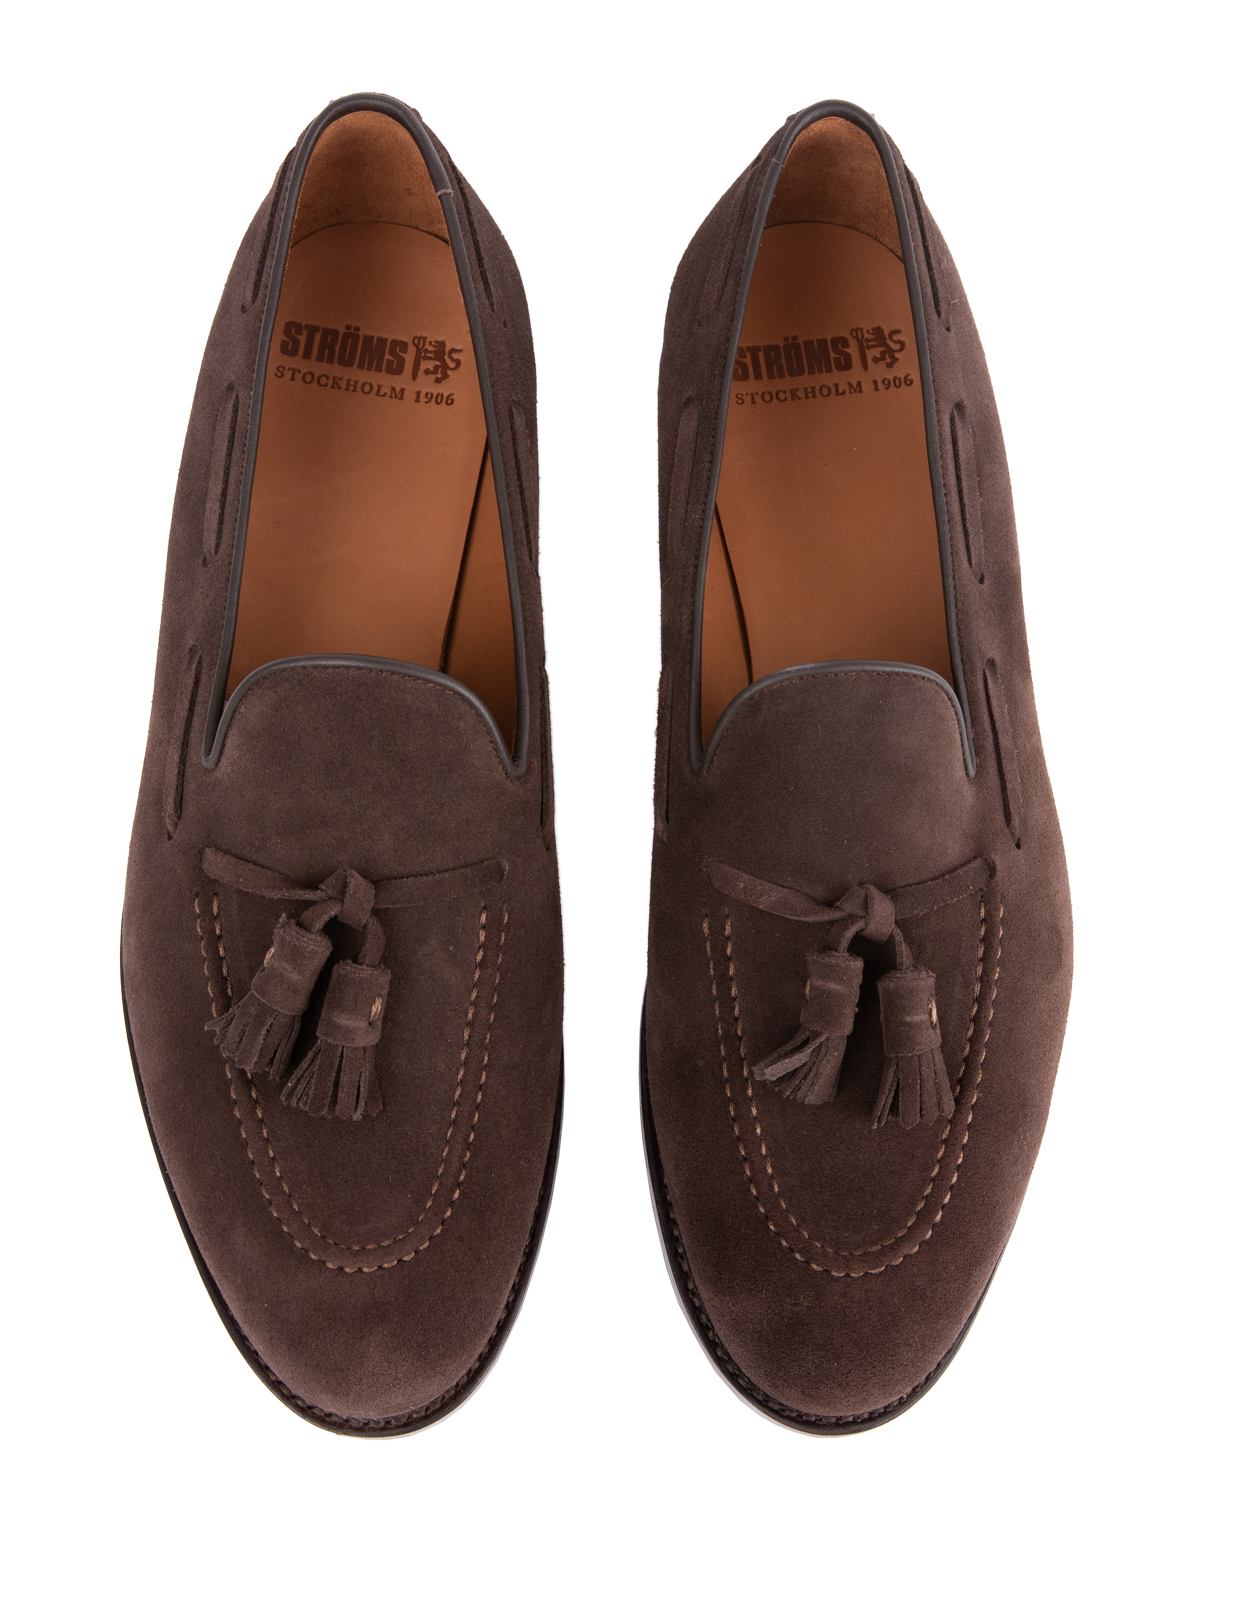 Tassel Loafers Suede Bitter Chocolate Stl 9